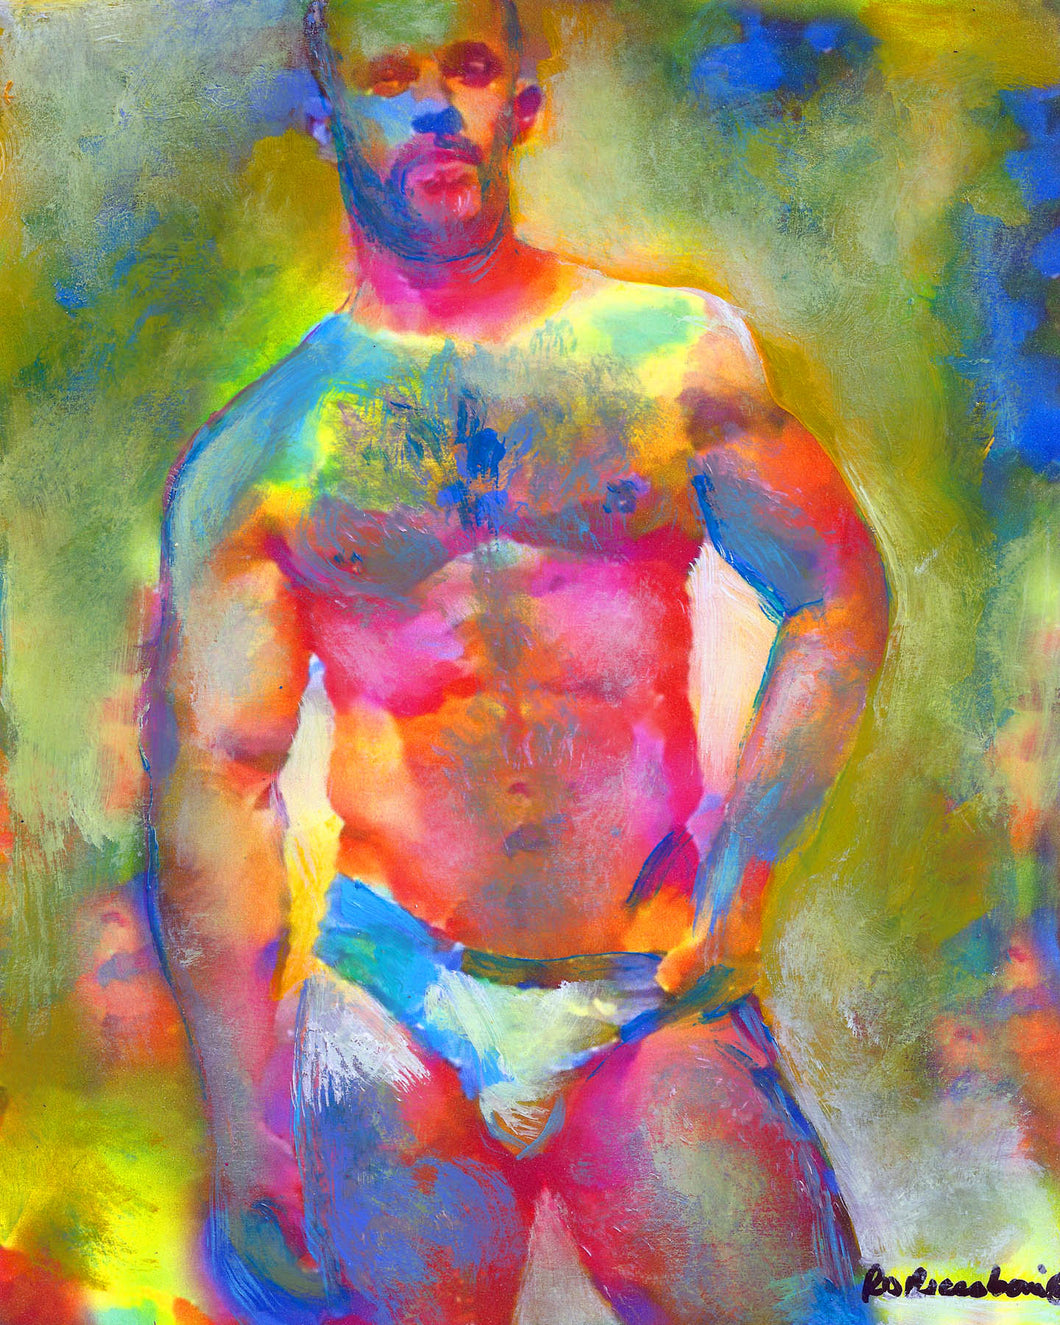 And So It Begins - Beefcake Style painting print